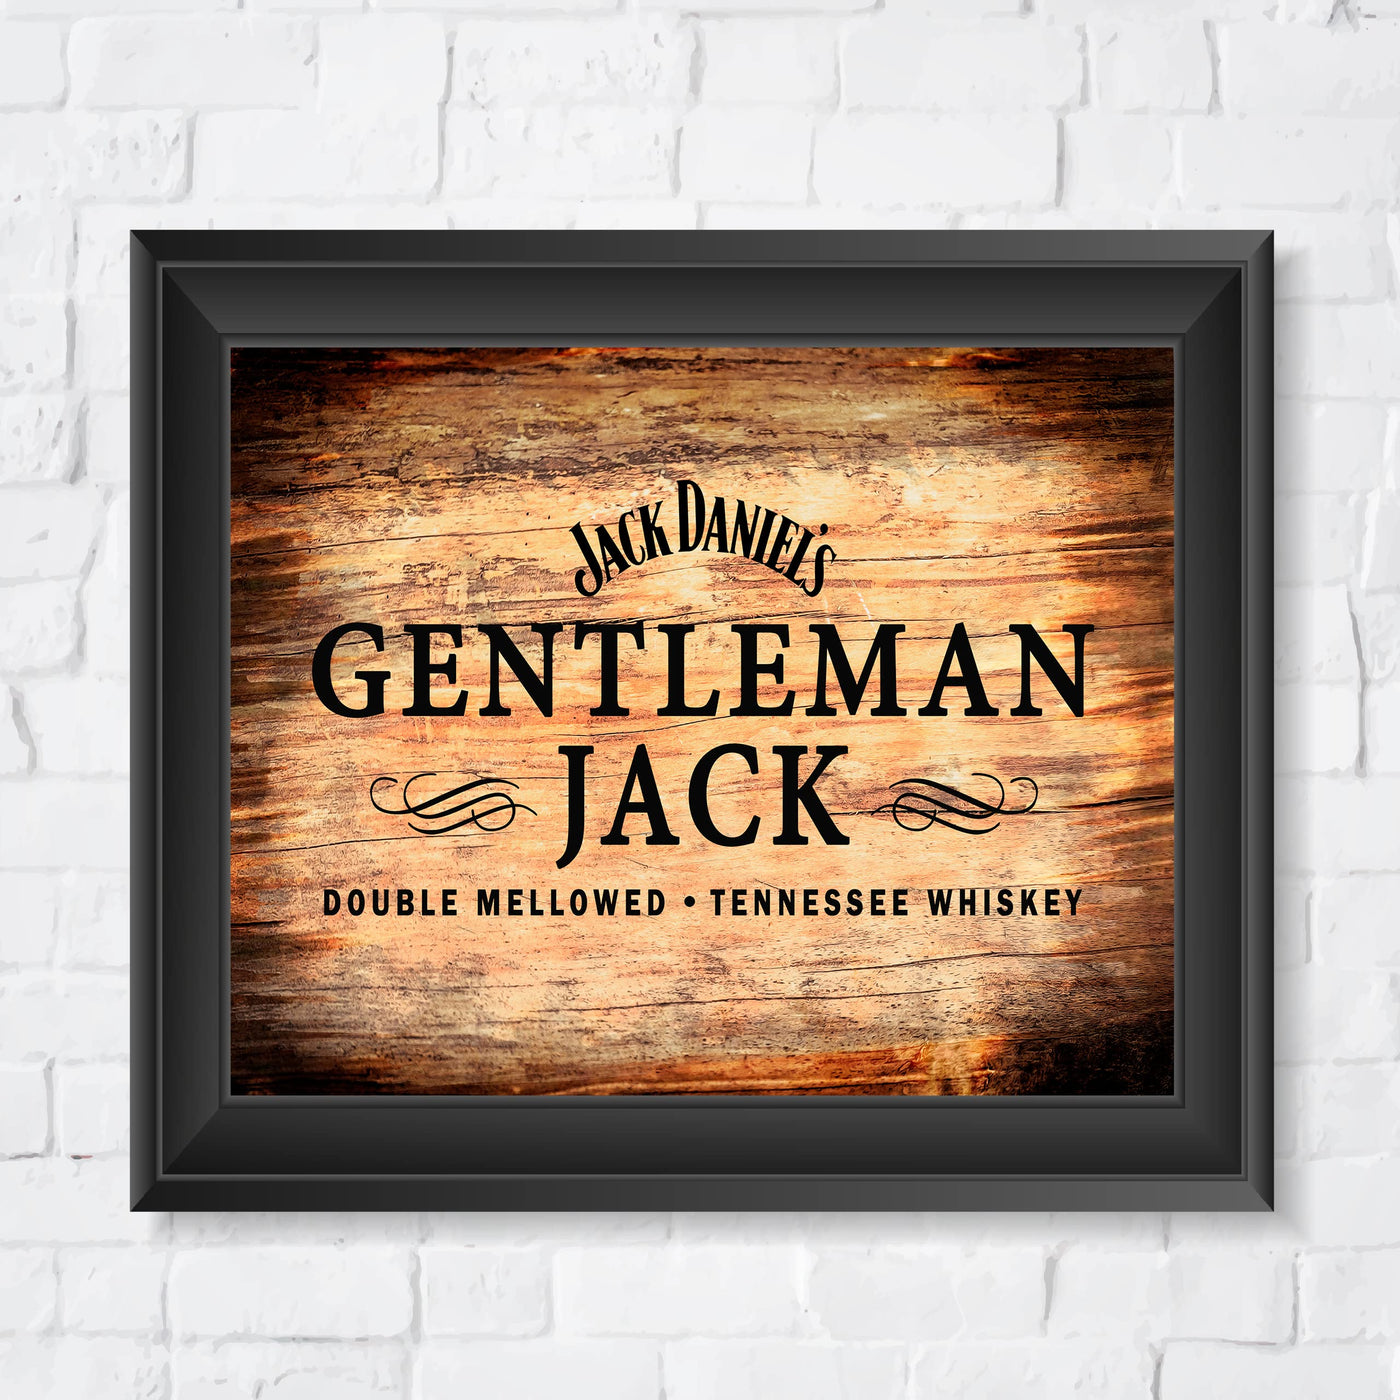 "Gentleman Jack"- Tennessee Bourbon Whiskey Wall Art - Rustic Wood Design Alcohol Print -Ready to Frame. Home-Kitchen-Bar-Man Cave Decor. Great Gift for All Liquor Drinkers!